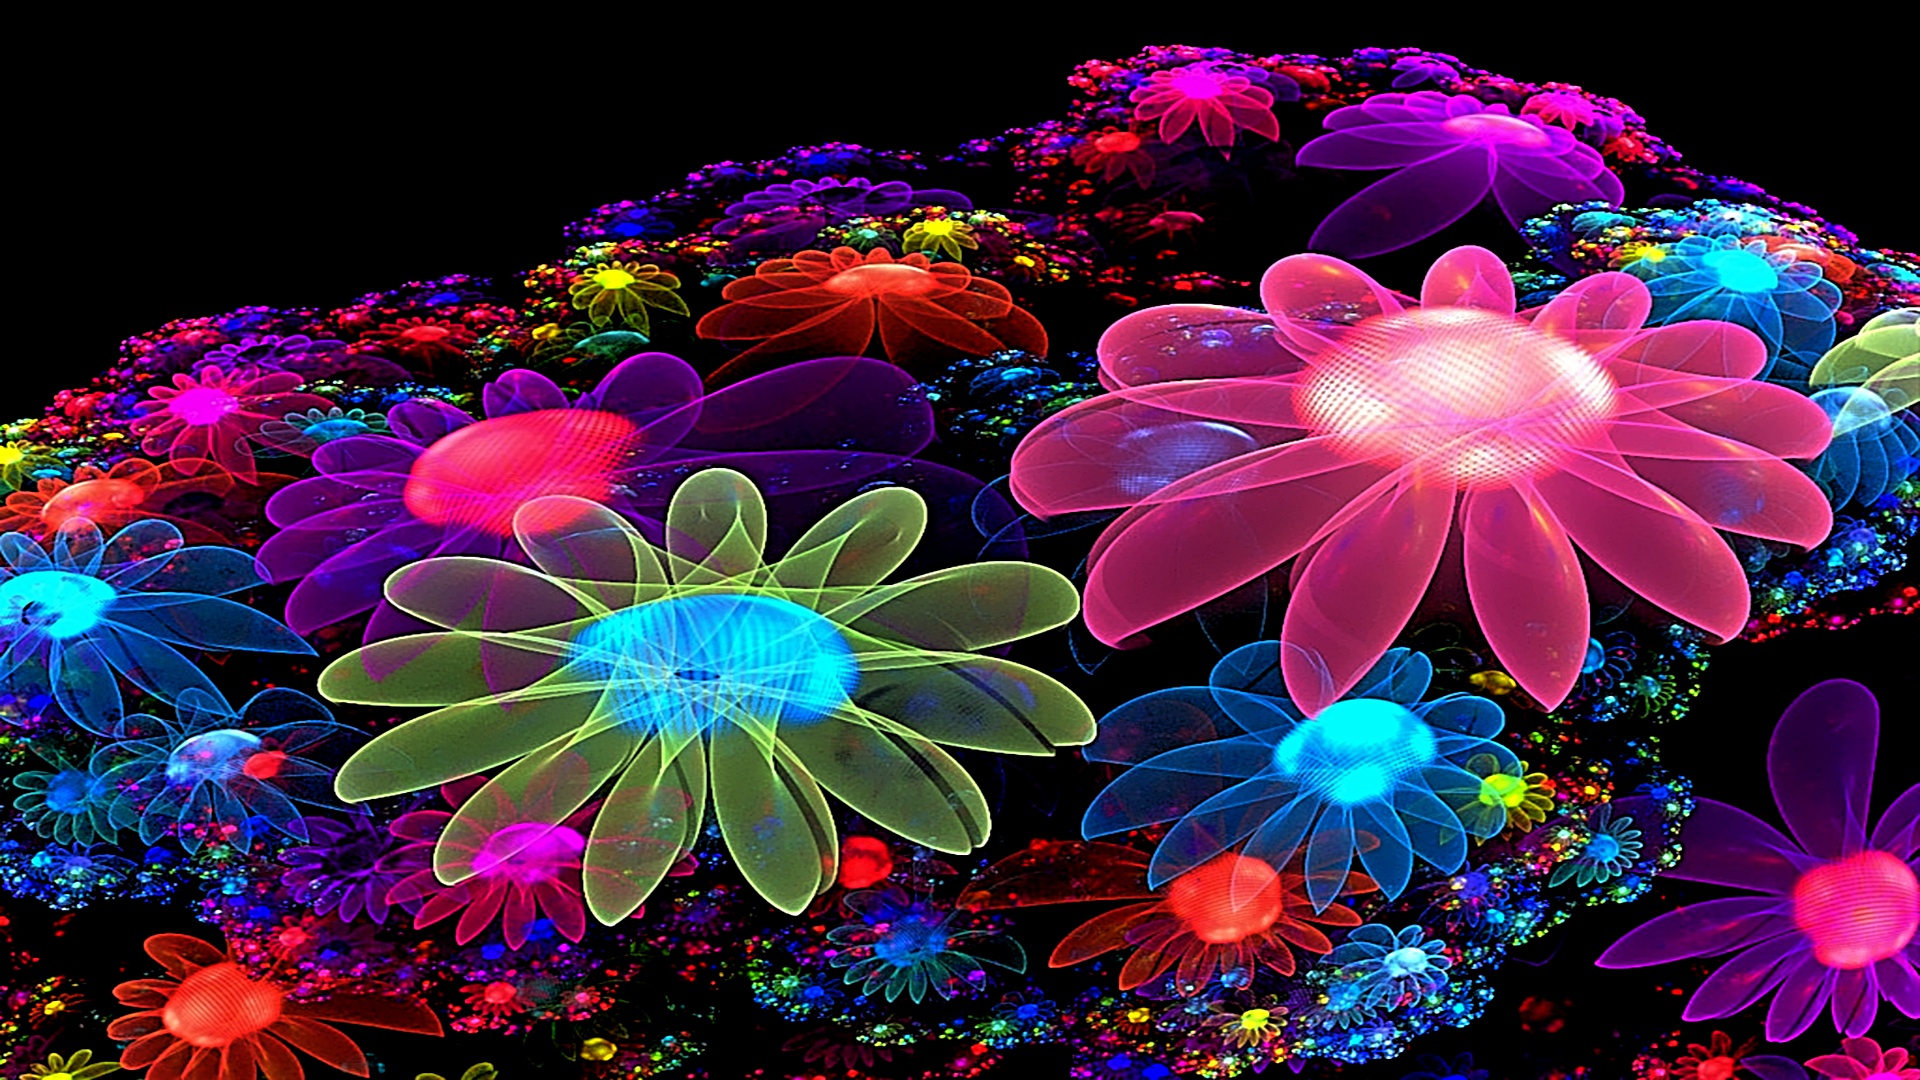 Free HD 3D Wallpapers Cool Colorful Flowers Desktop Wallpapers Free